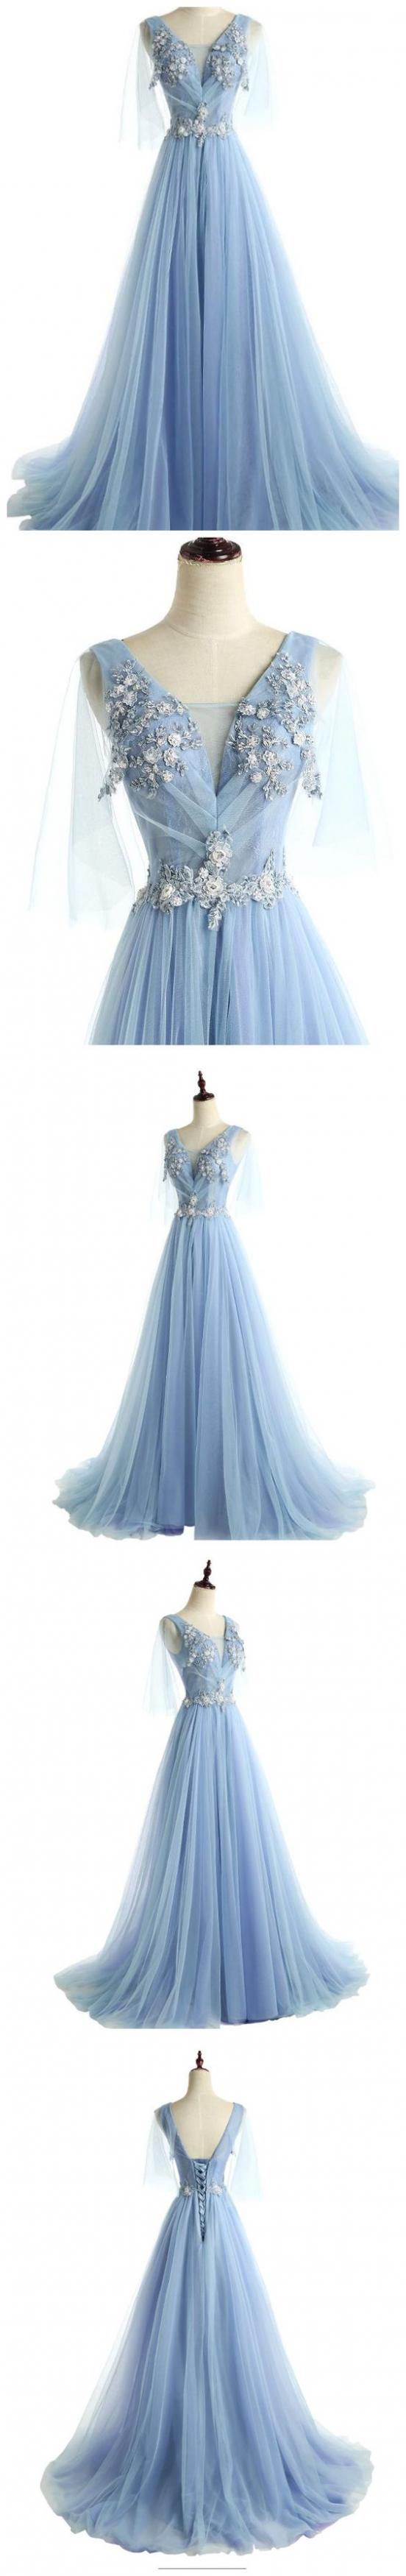 Prom Dress Fashions Long Prom Dress/evening Dress Modest Party Gowns Sexy Prom Gowns,pd14617